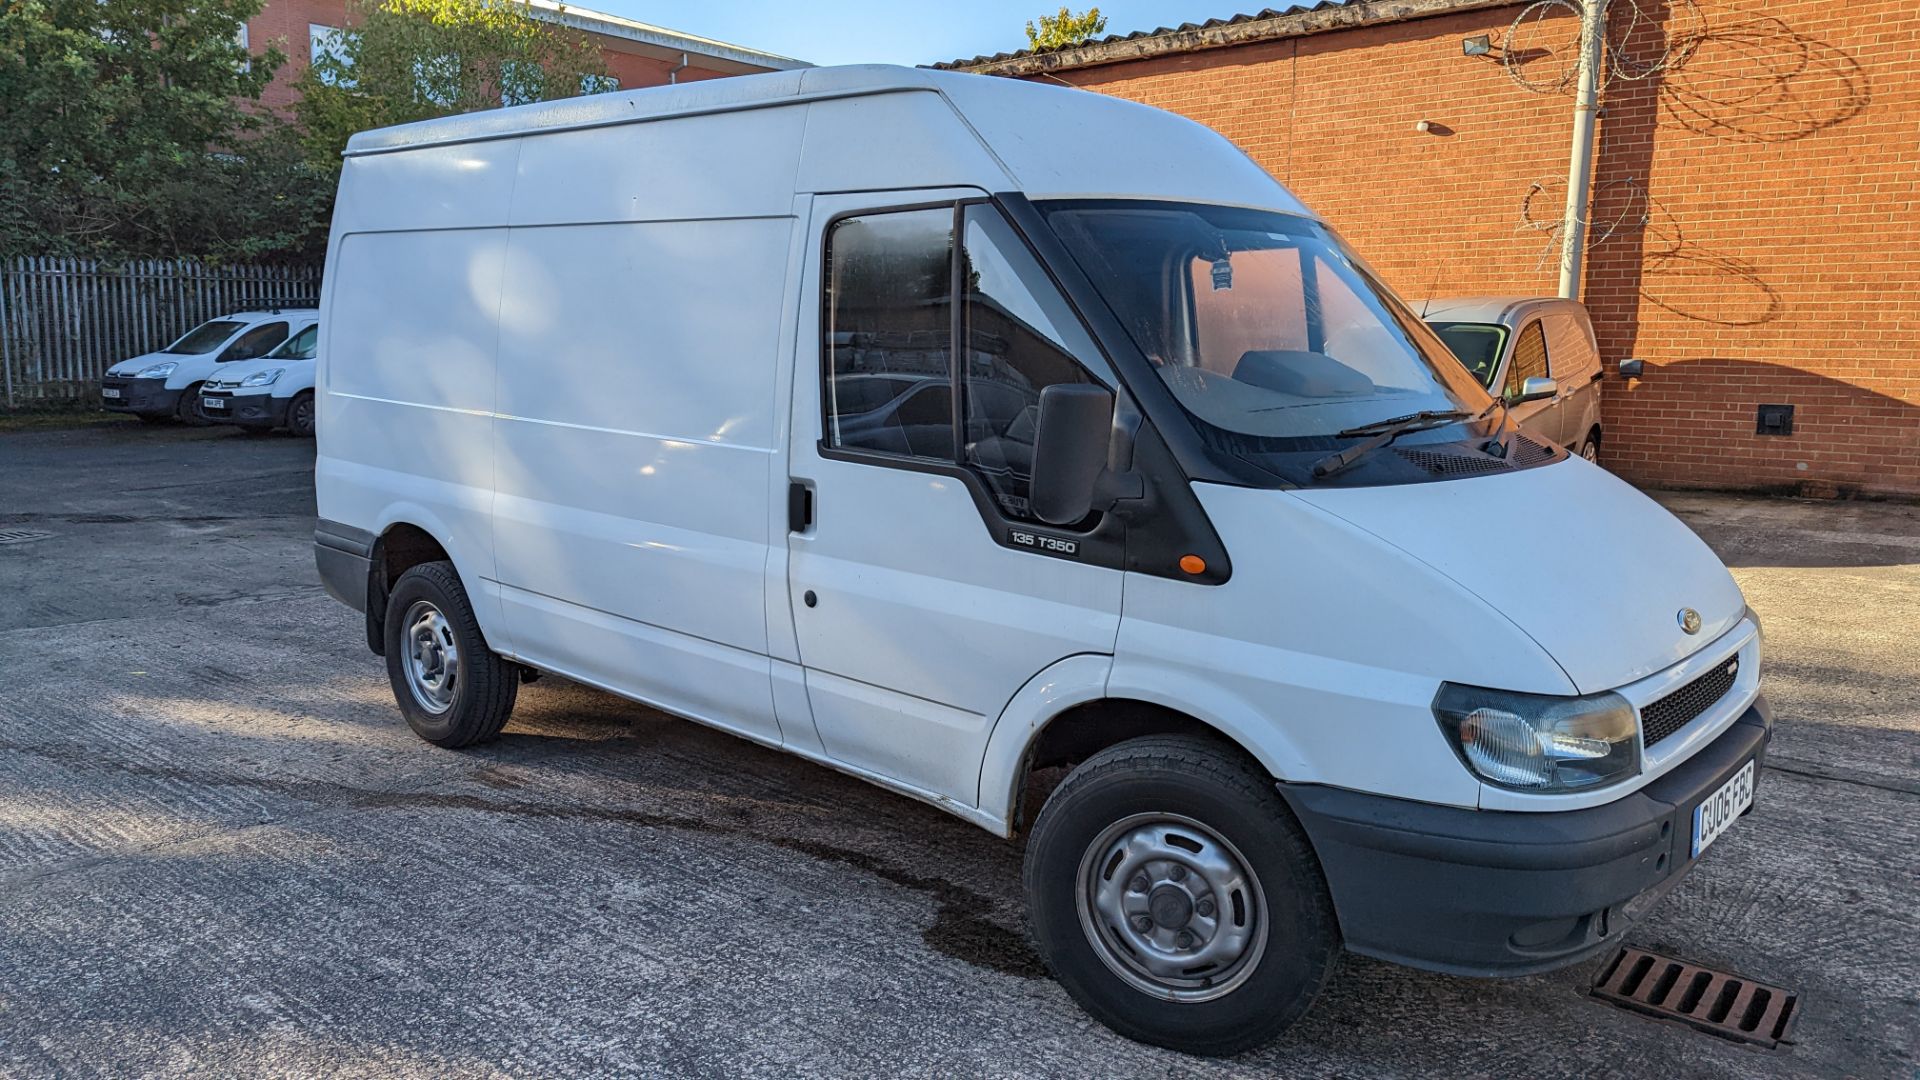 CU06 FBC Ford Transit panel van, 6 speed manual gearbox, 2402cc diesel engine. Colour: white. Fir - Image 3 of 44